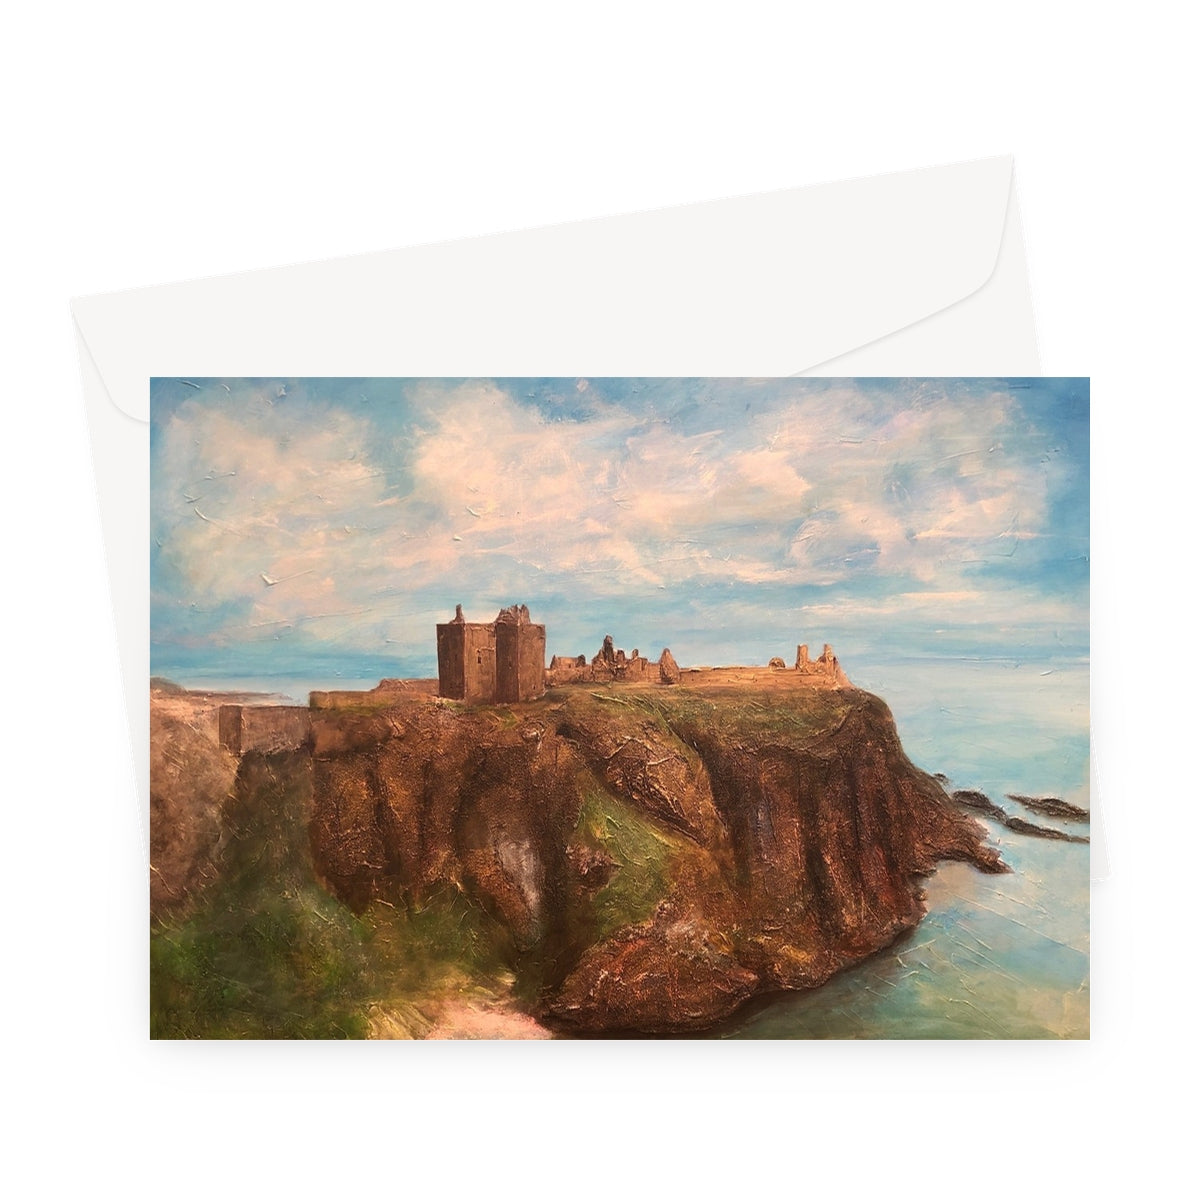 Dunnottar Castle Art Gifts Greeting Card-Stationery-Prodigi-A5 Landscape-10 Cards-Paintings, Prints, Homeware, Art Gifts From Scotland By Scottish Artist Kevin Hunter